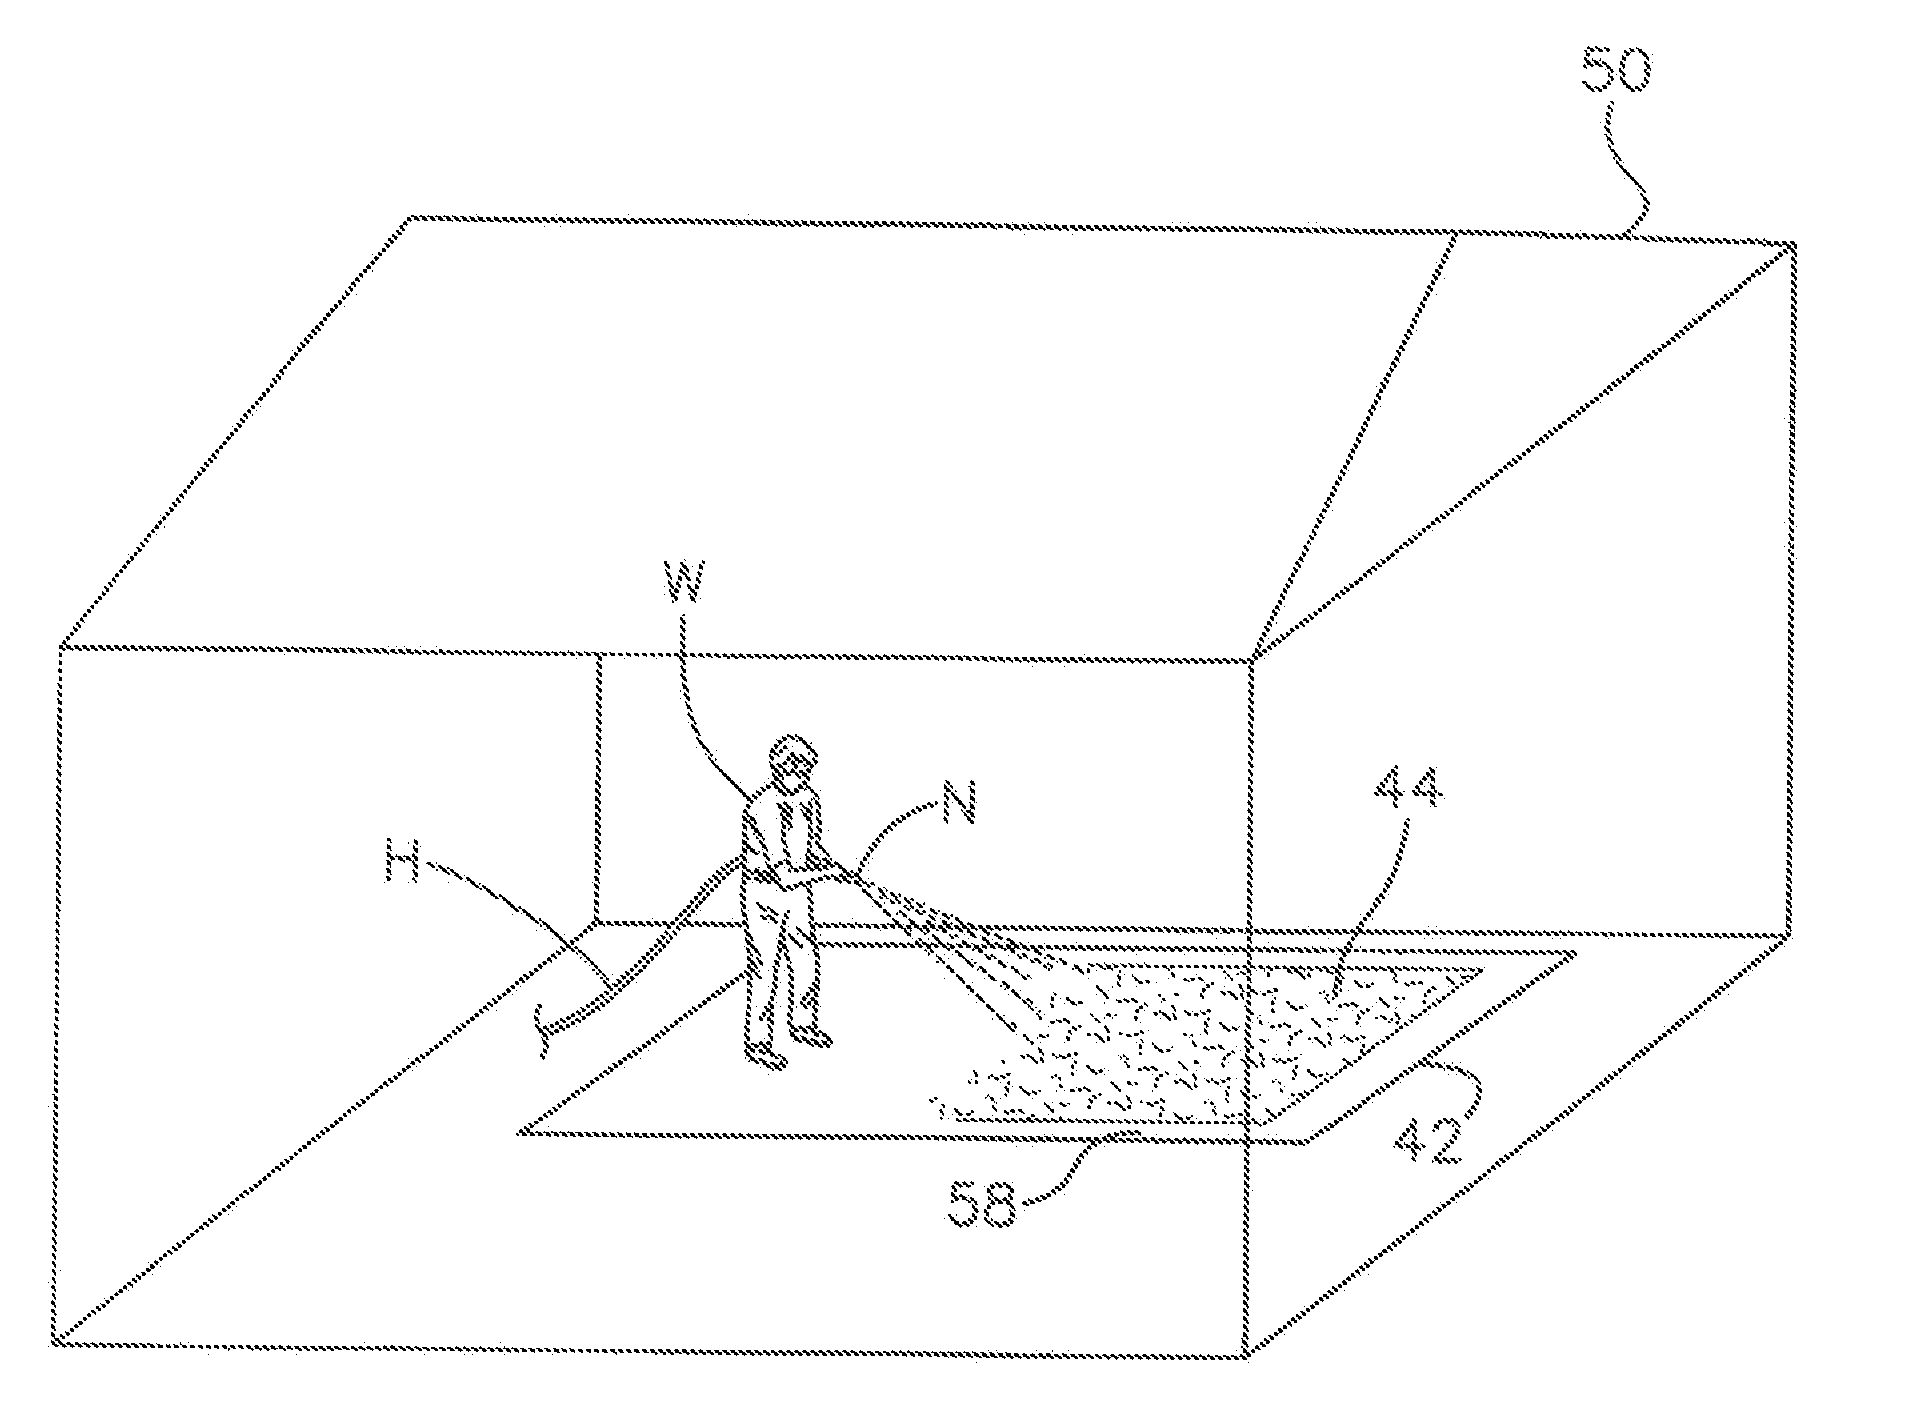 Secondary Containment Panels and Process for Making and Installing Same